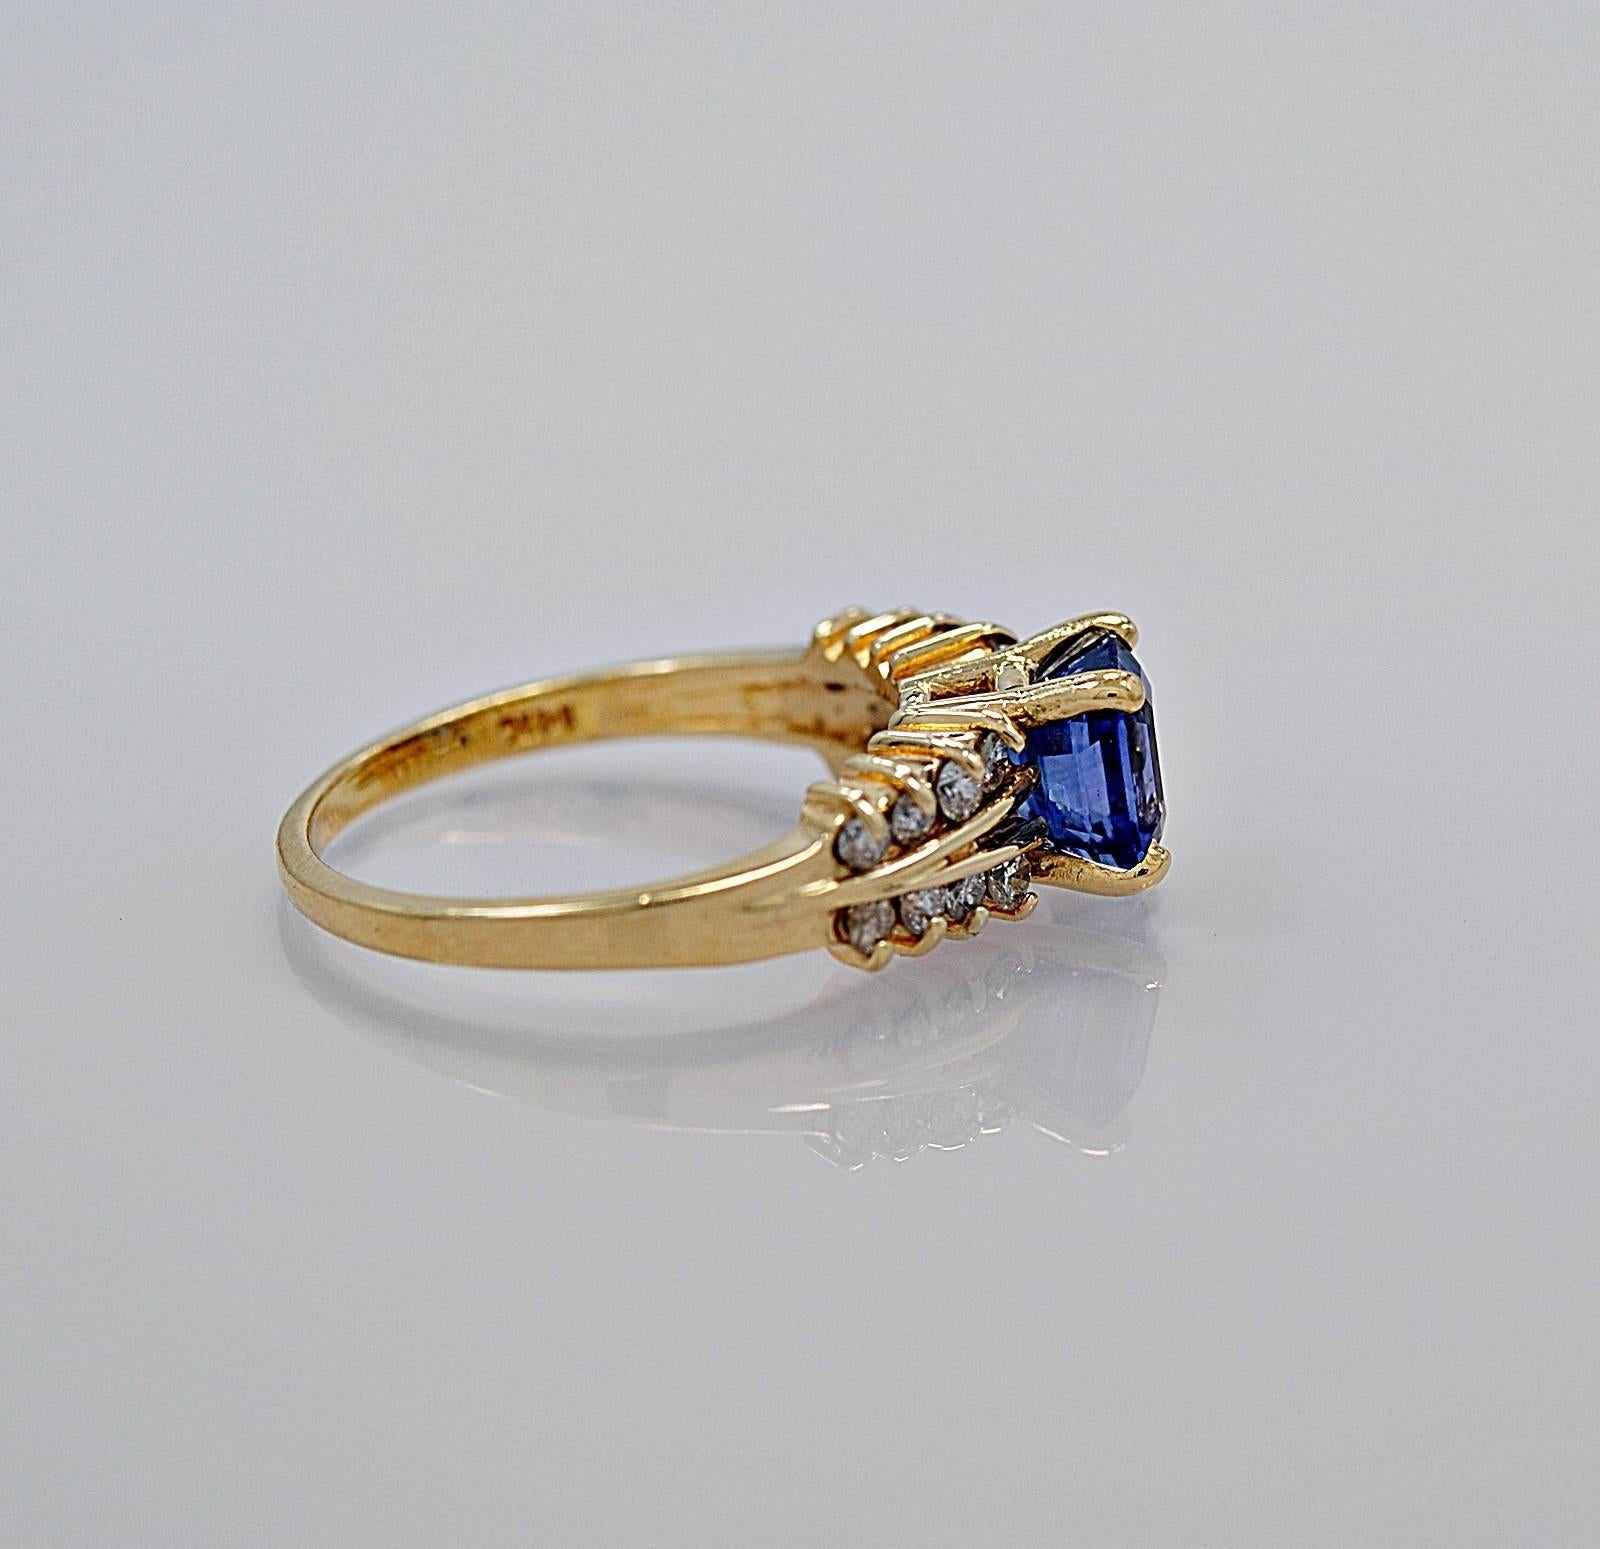 A sapphire engagement ring 1.50ct. natural sapphire in a square step cut style with accenting diamond melee weighing .20ct. apx. T.W. The ring is crafted in 14K yellow gold and this sapphire and diamond ring would be a wonderful alternative to the